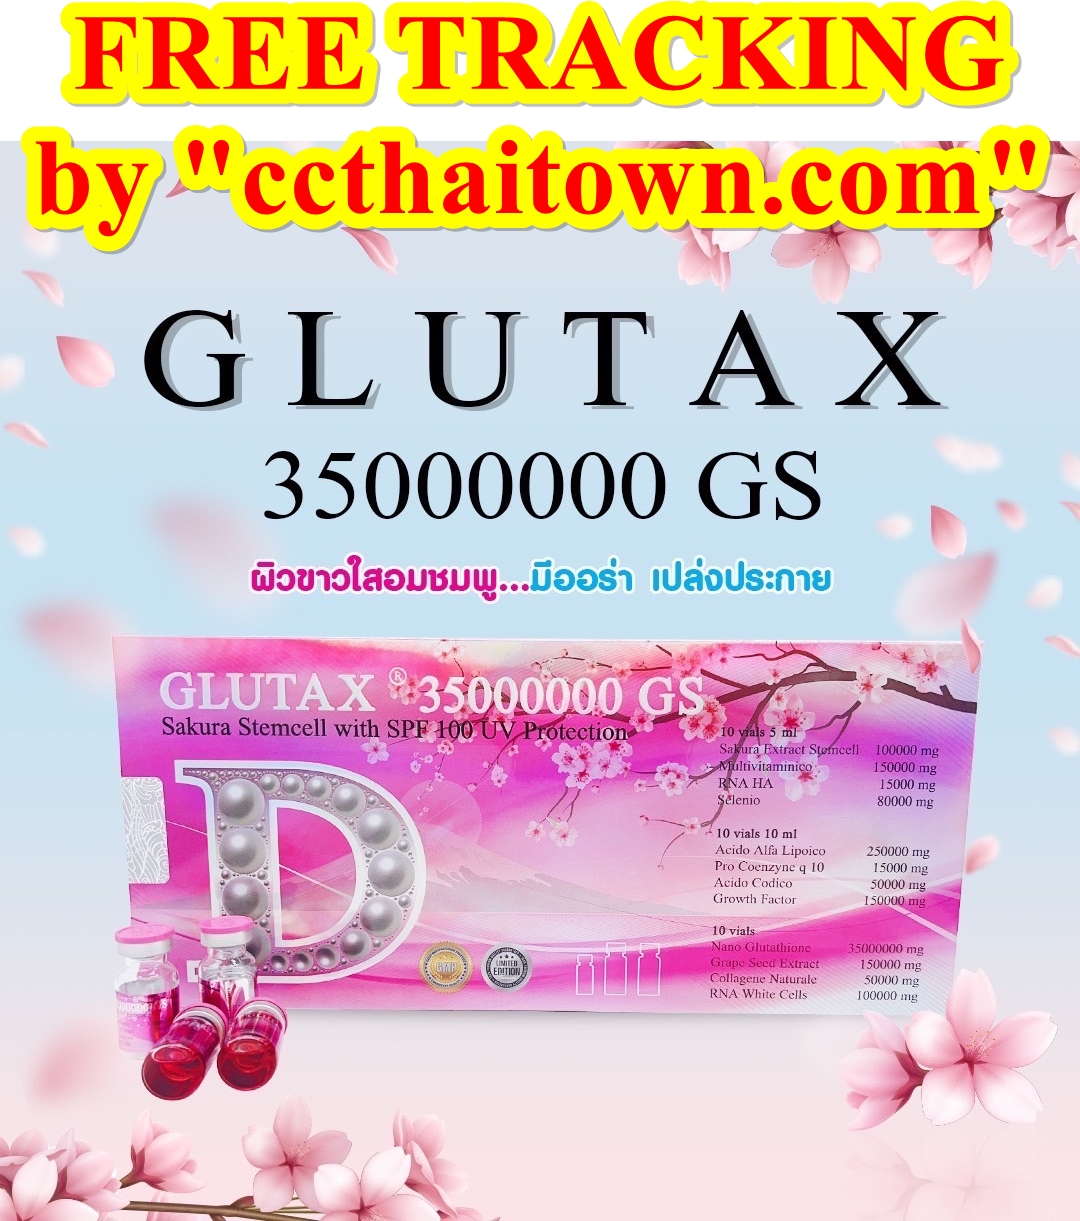 GLUTAX 35000000GS SAKURA STEMCELL WITH SPF 100 UV PROTECTION GLUTATHIONE SKIN WHITENING INJECTION by www.ccthaitown.com